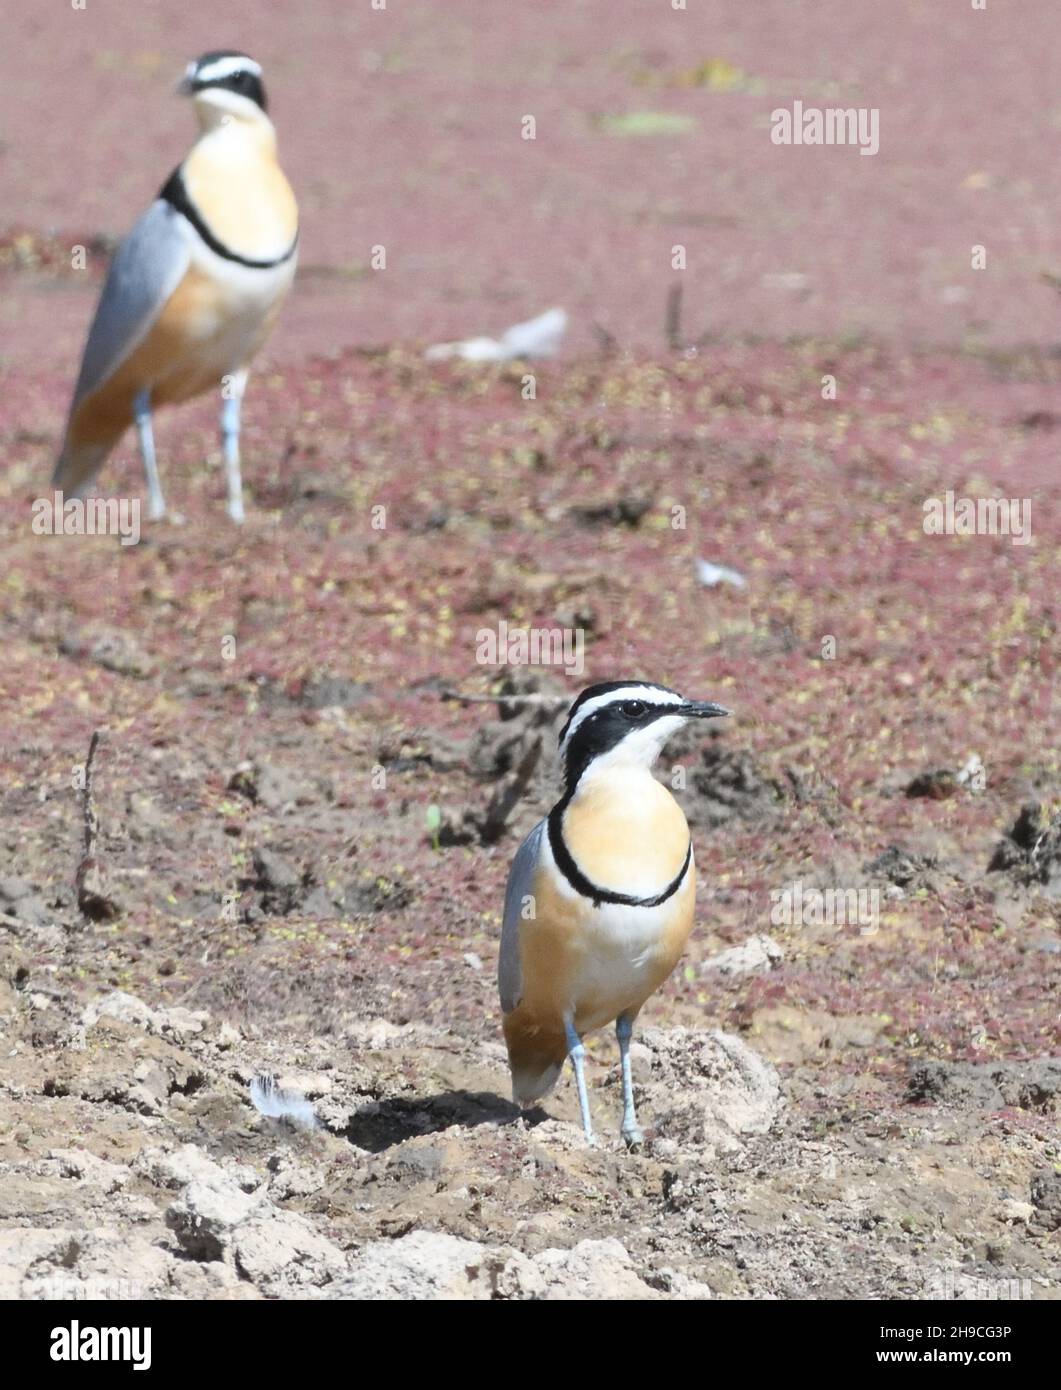 Egyptian plovers (Pluvianus aegyptius) by a muddy pool. Njau, , The Republic of the Gambia. Stock Photo